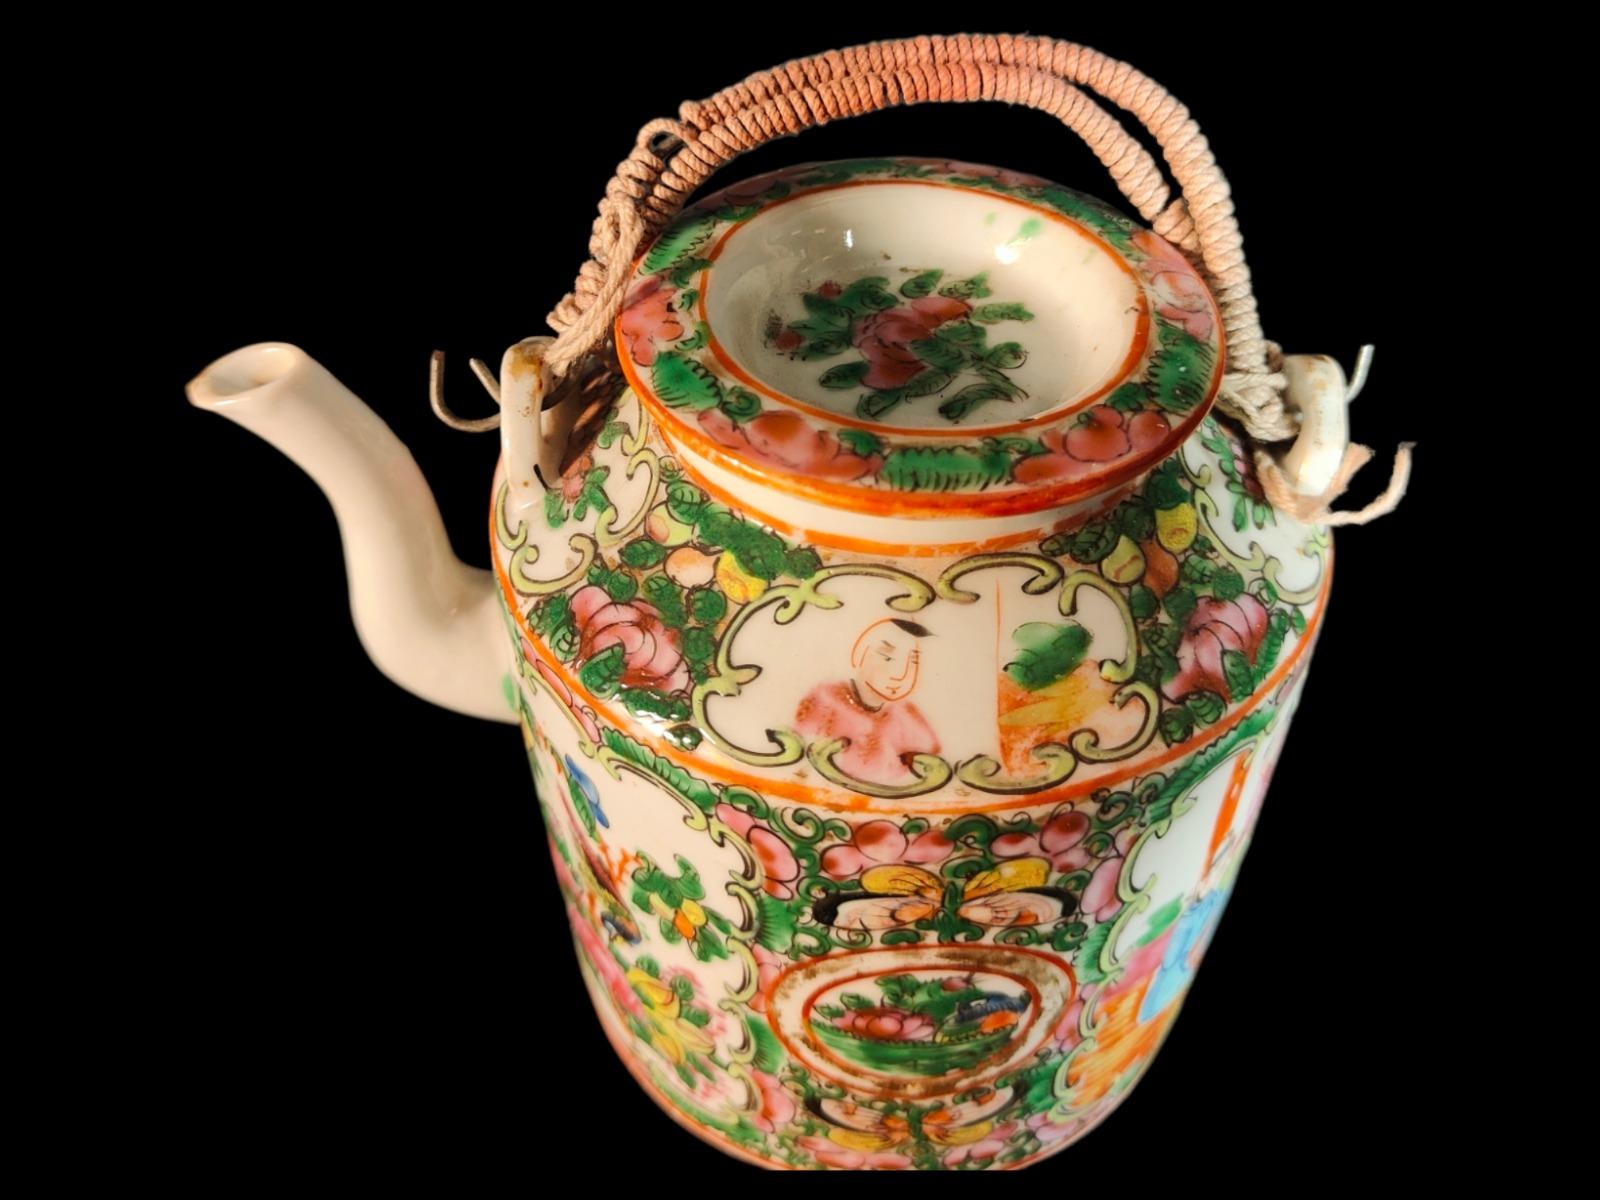 19th century Chinese teapot

19th century canton porcelain teapot it is in perfect condition without restoration or accident measurements: 14 cm high and 10 cm in diameter
Very good condition.